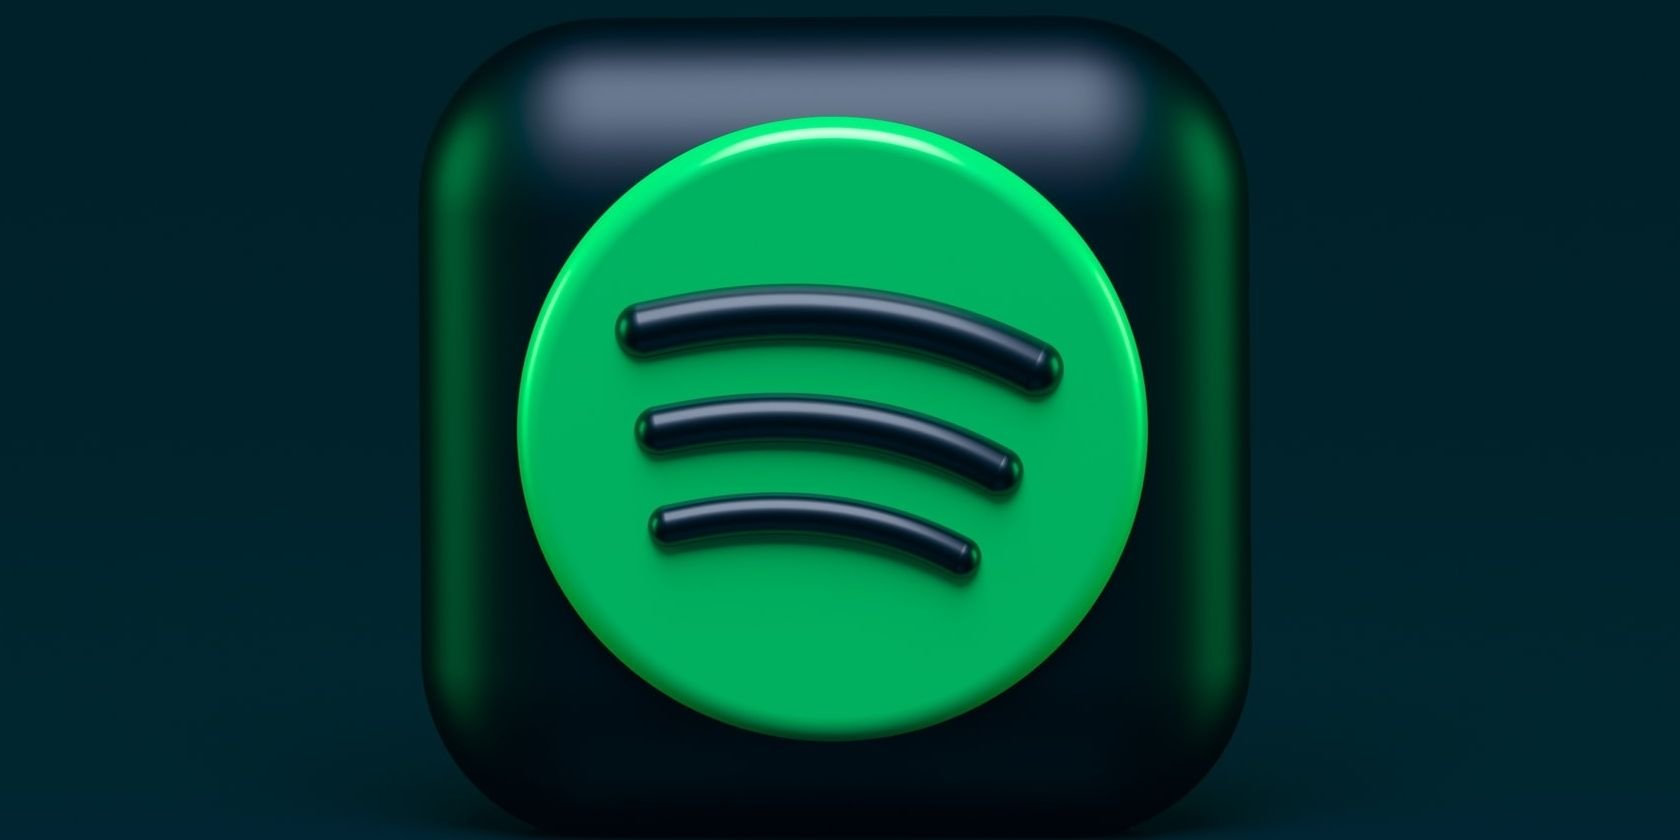 How to Recover Lost or Deleted Spotify Playlists